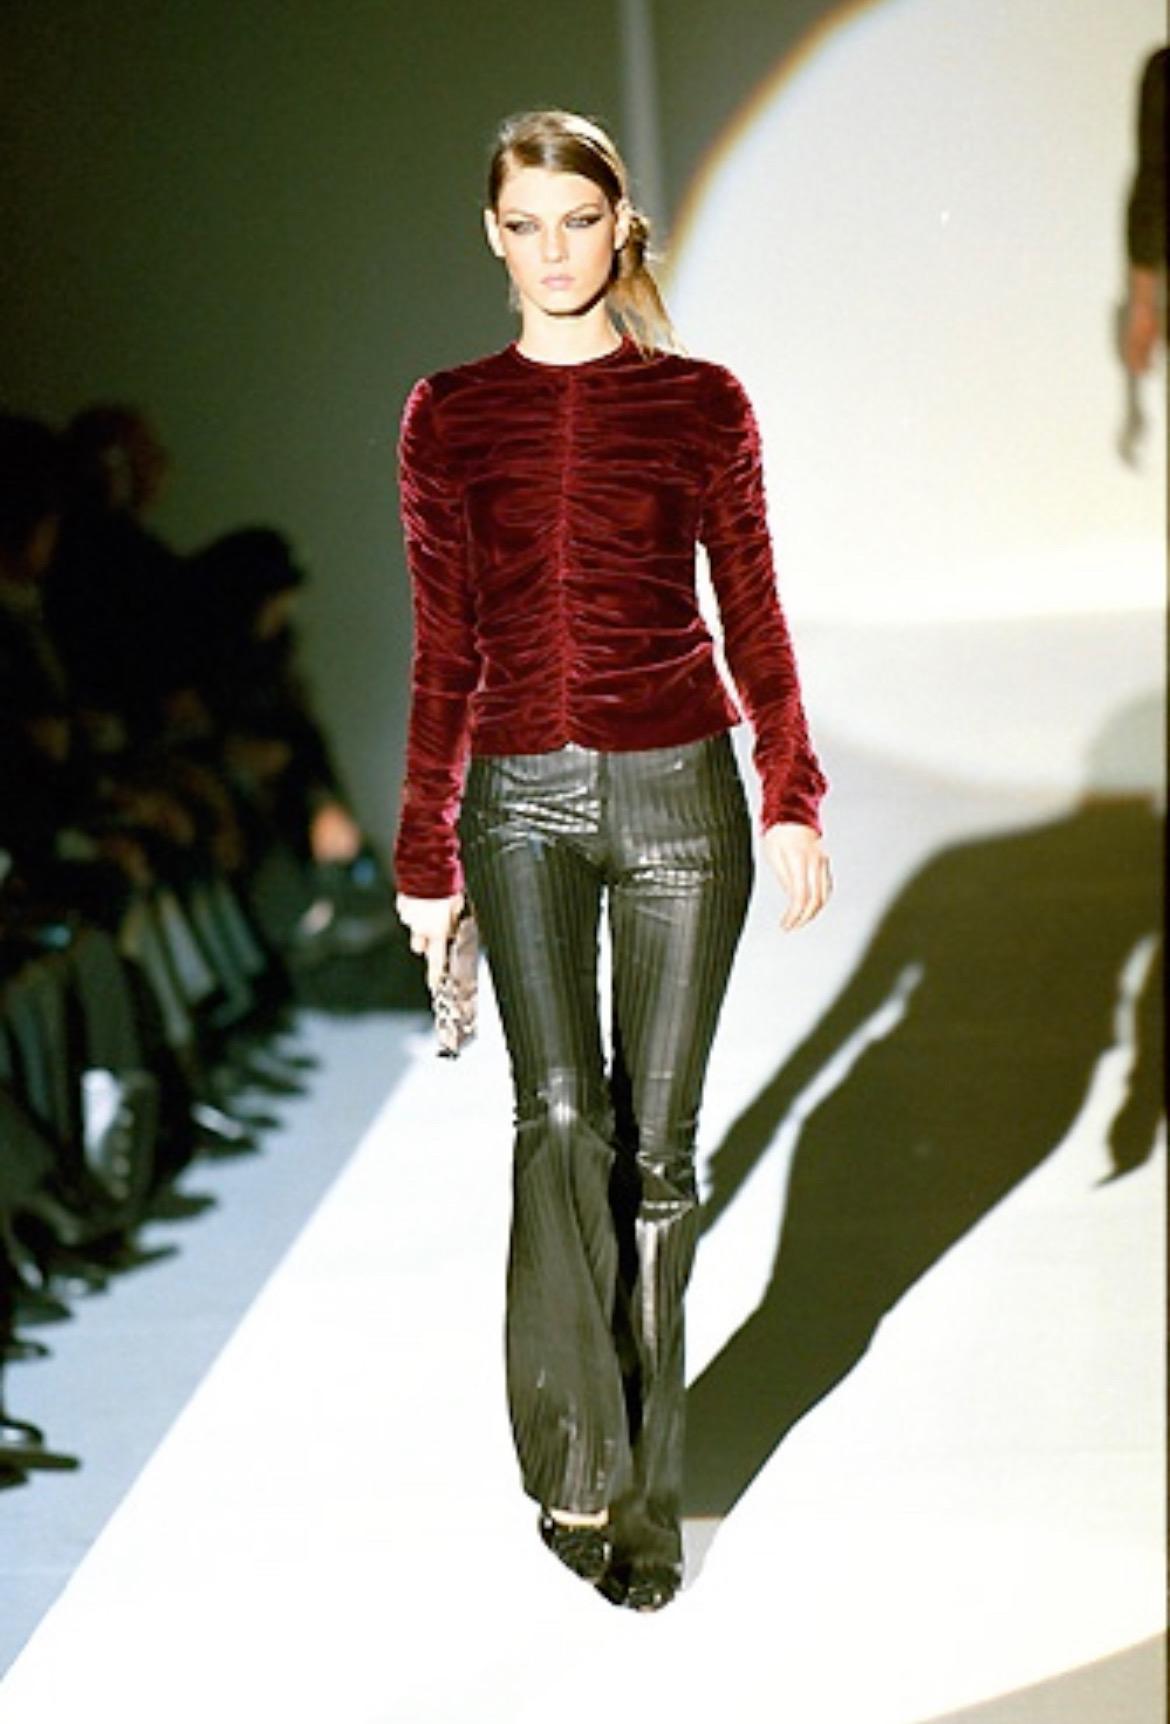 Presenting a gorgeous ruched deep red velvet Gucci top, designed by Tom Ford. From the Fall/Winter 1999 collection, this fabulous top debuted on the season's runway. Completely covered in ruching, this top features long sleeves and a crew neckline.